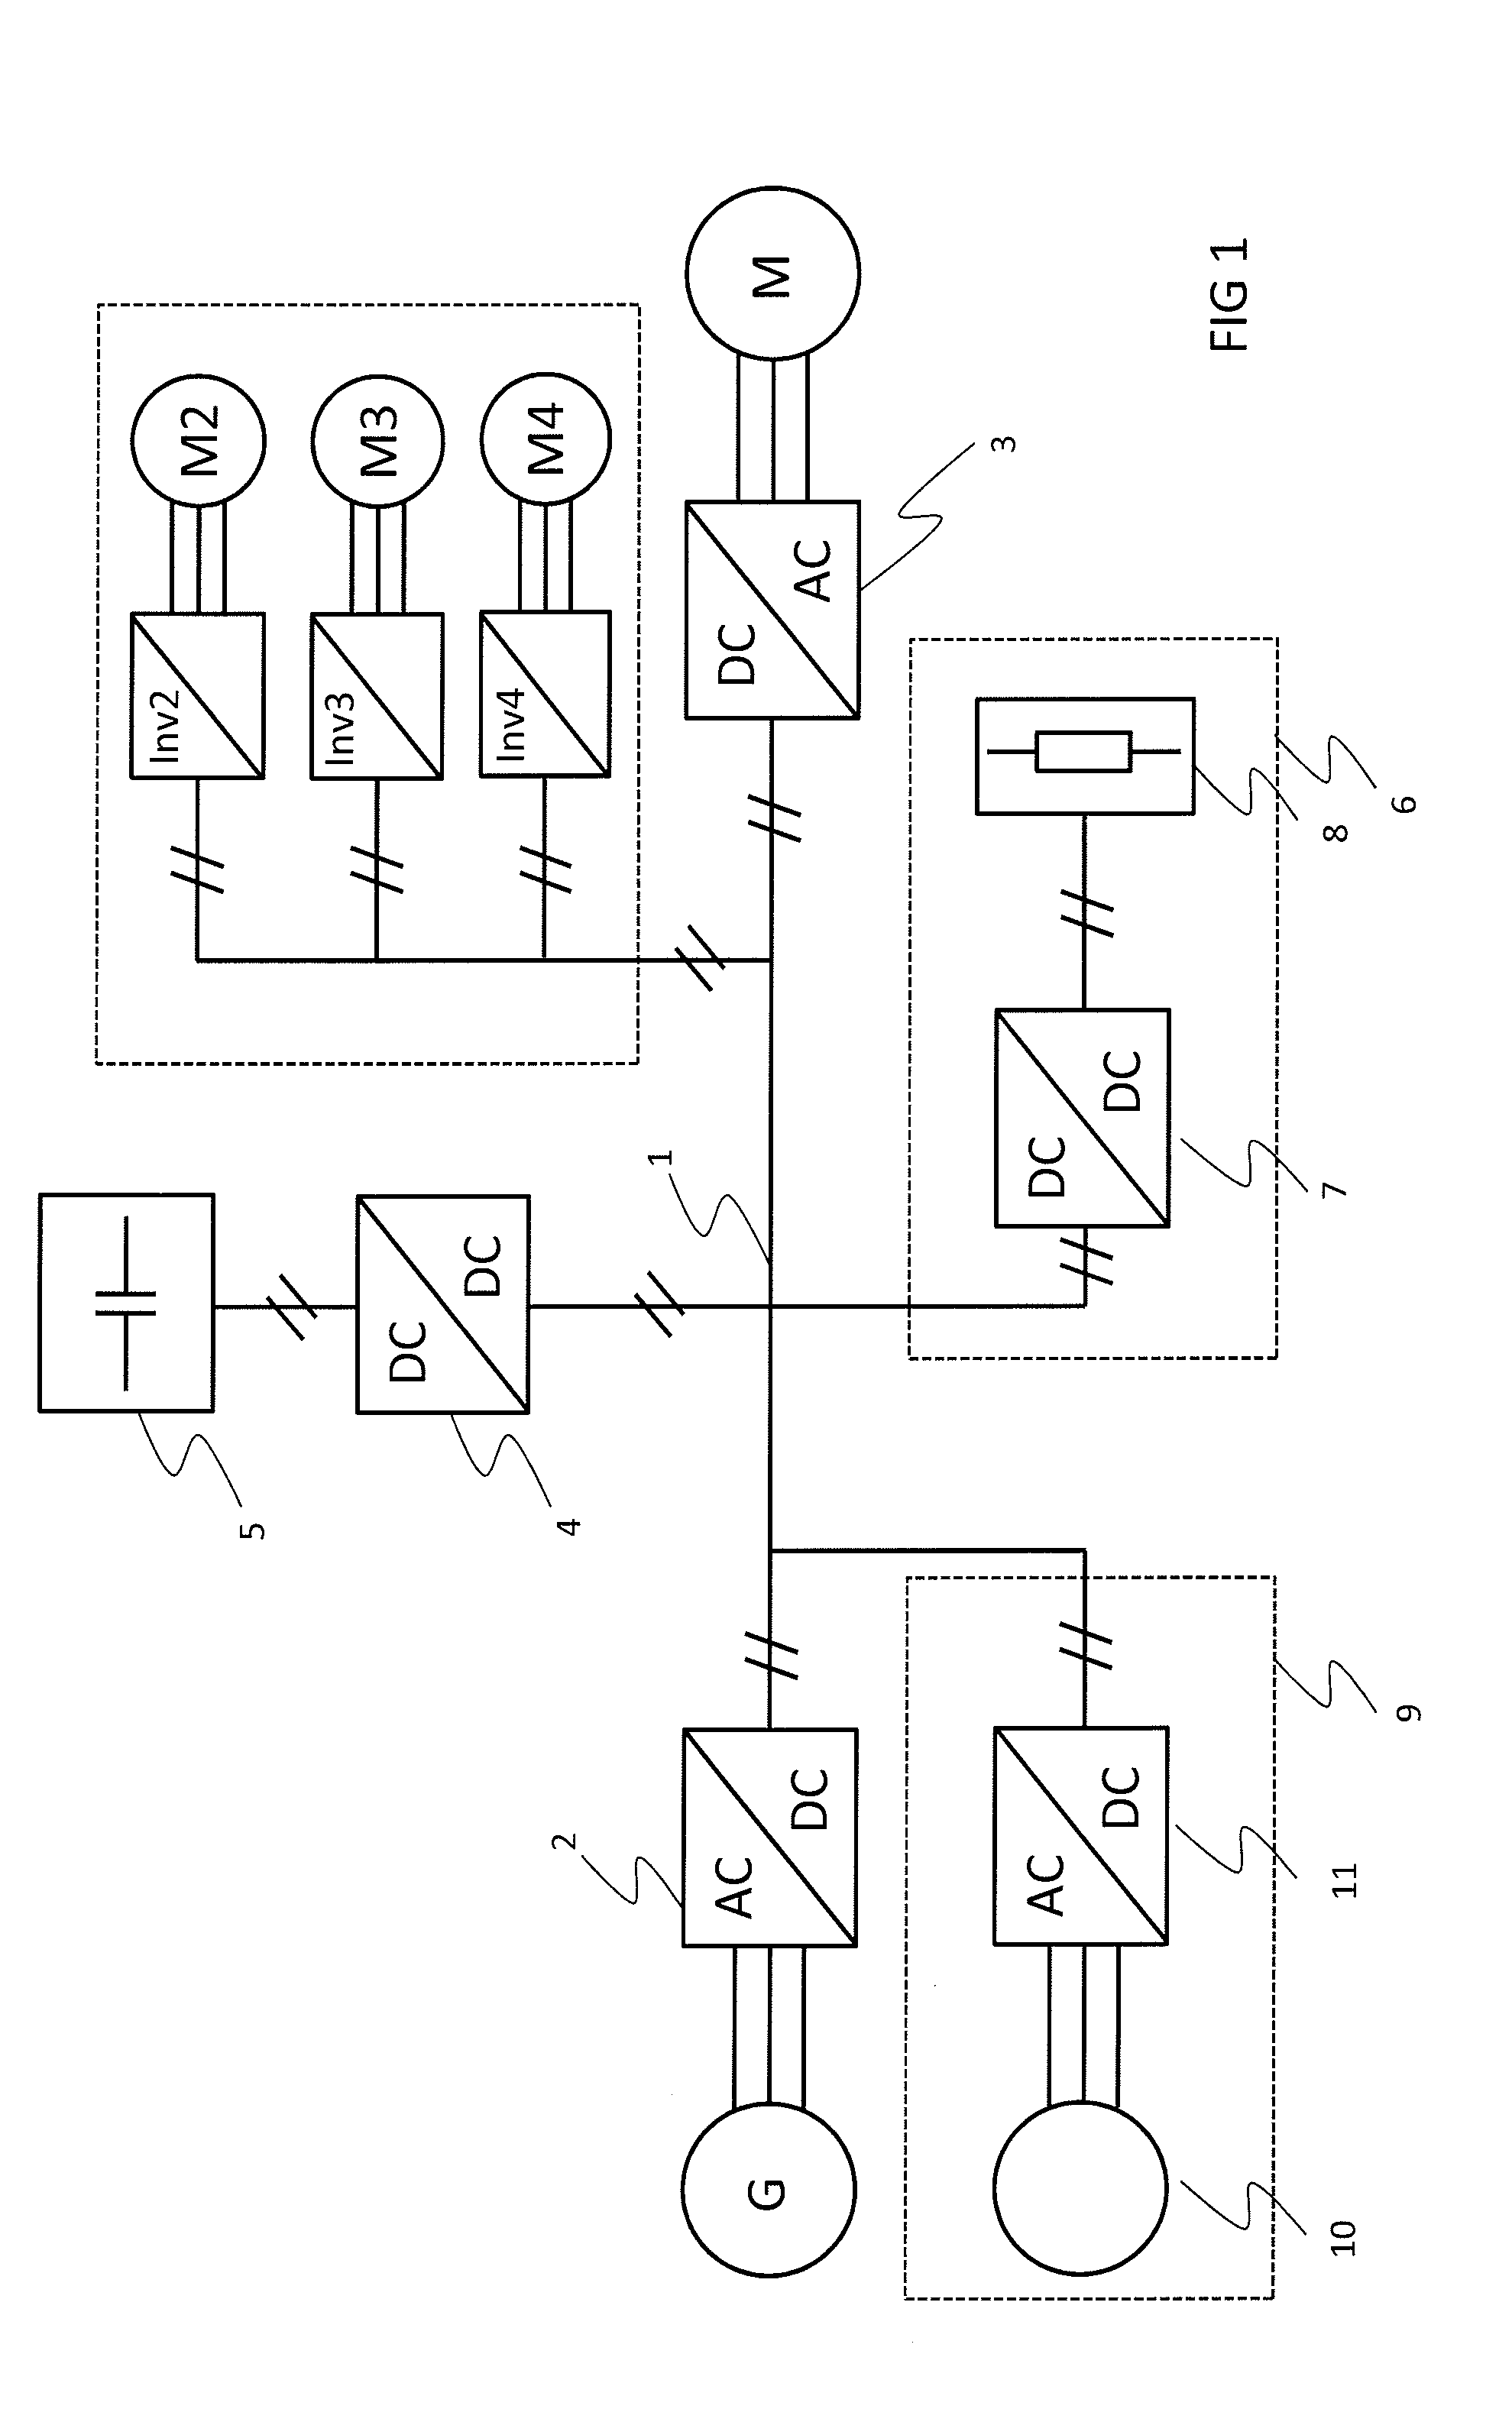 Electrical system having a DC link